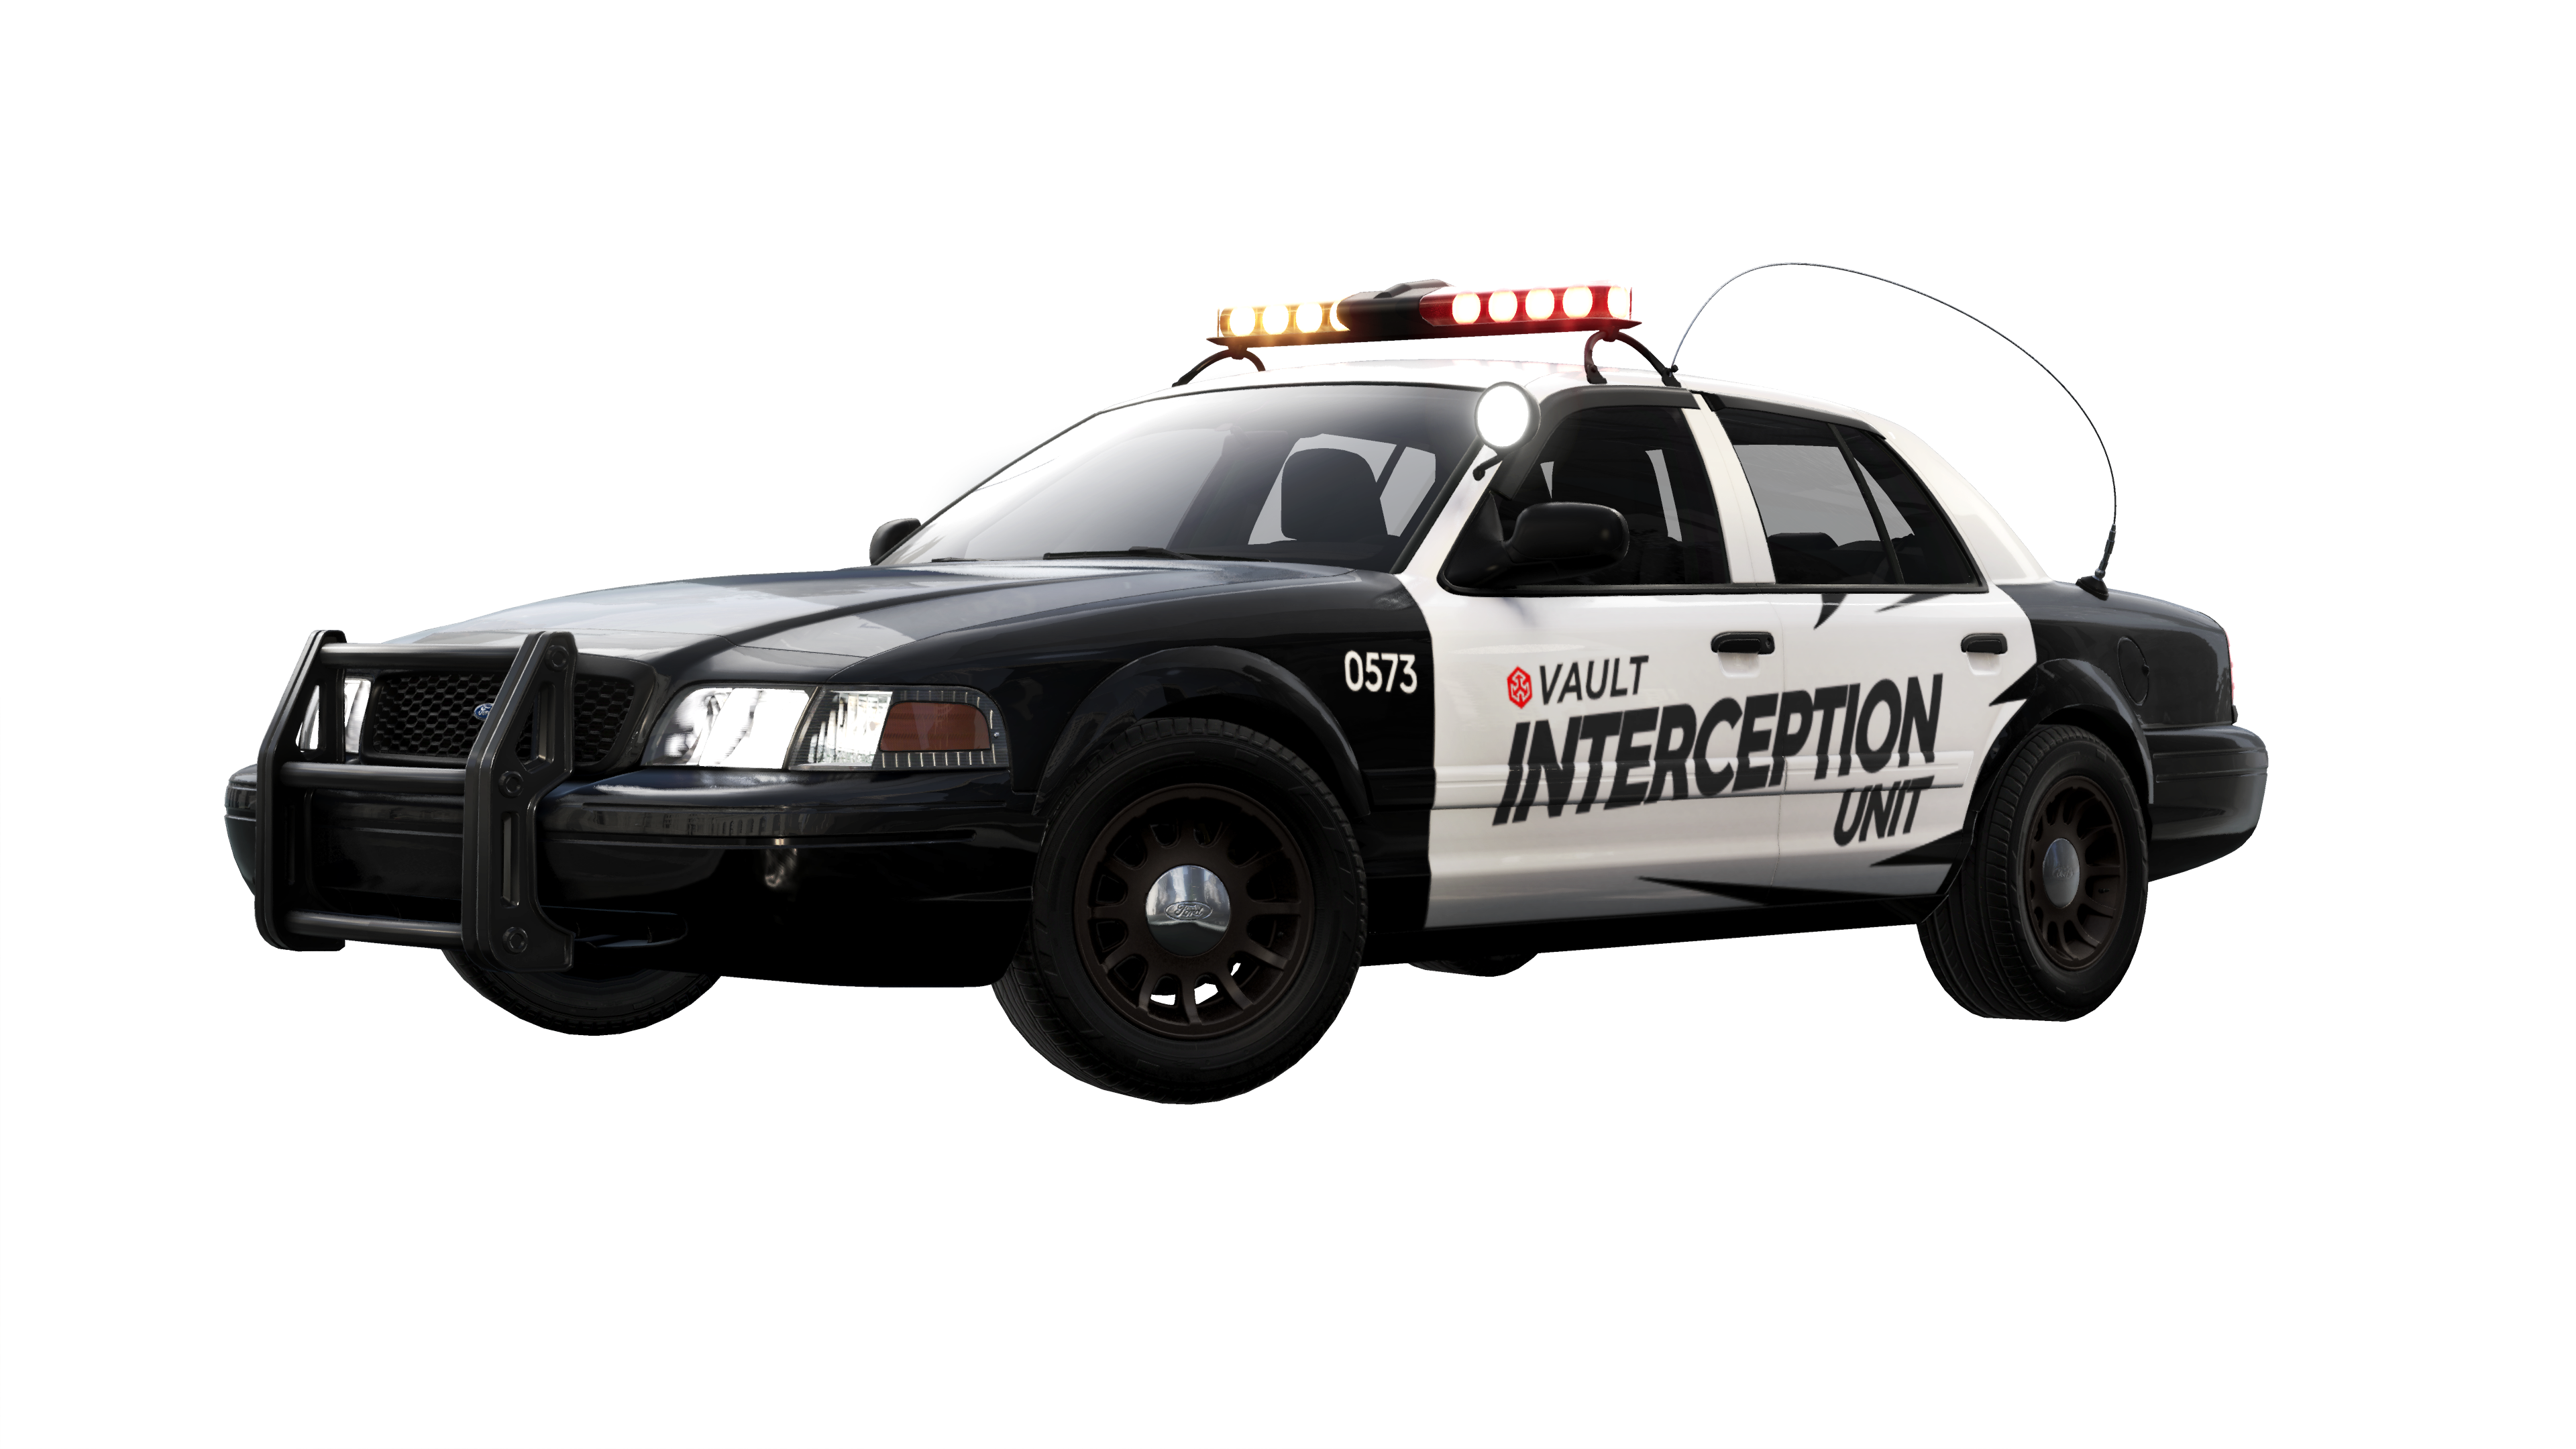 [TC2] News Article - S5E1 Overview - Ford Crown Victoria